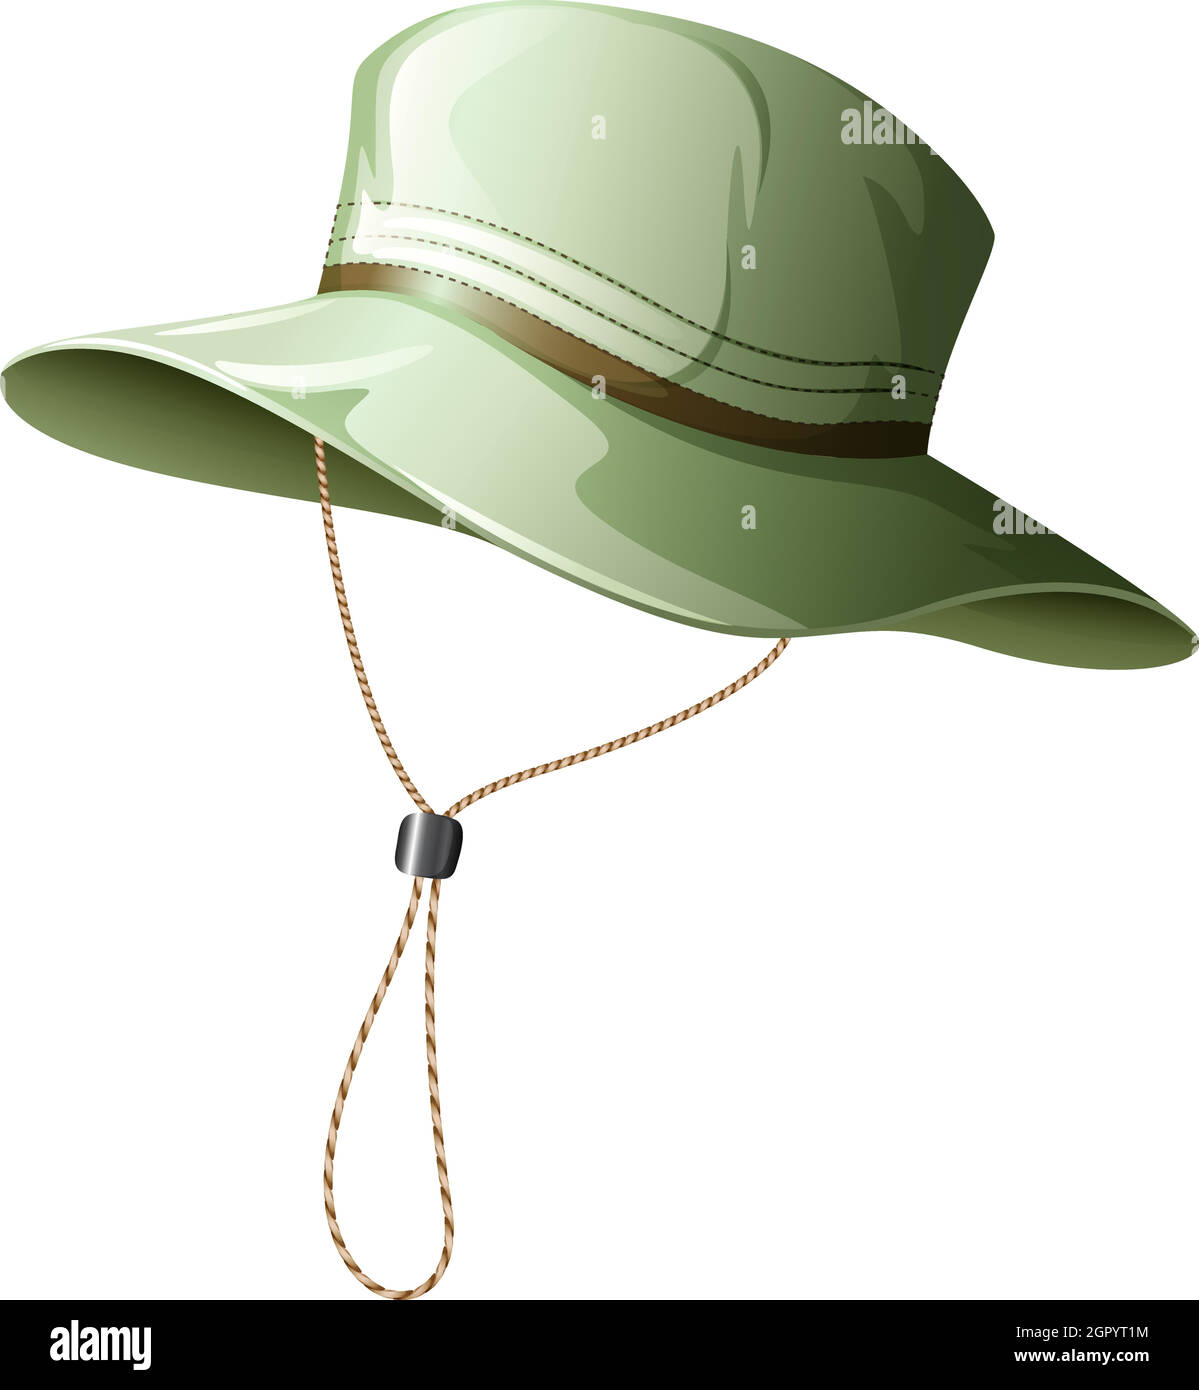 Fishing fishing hat Stock Vector Images - Alamy